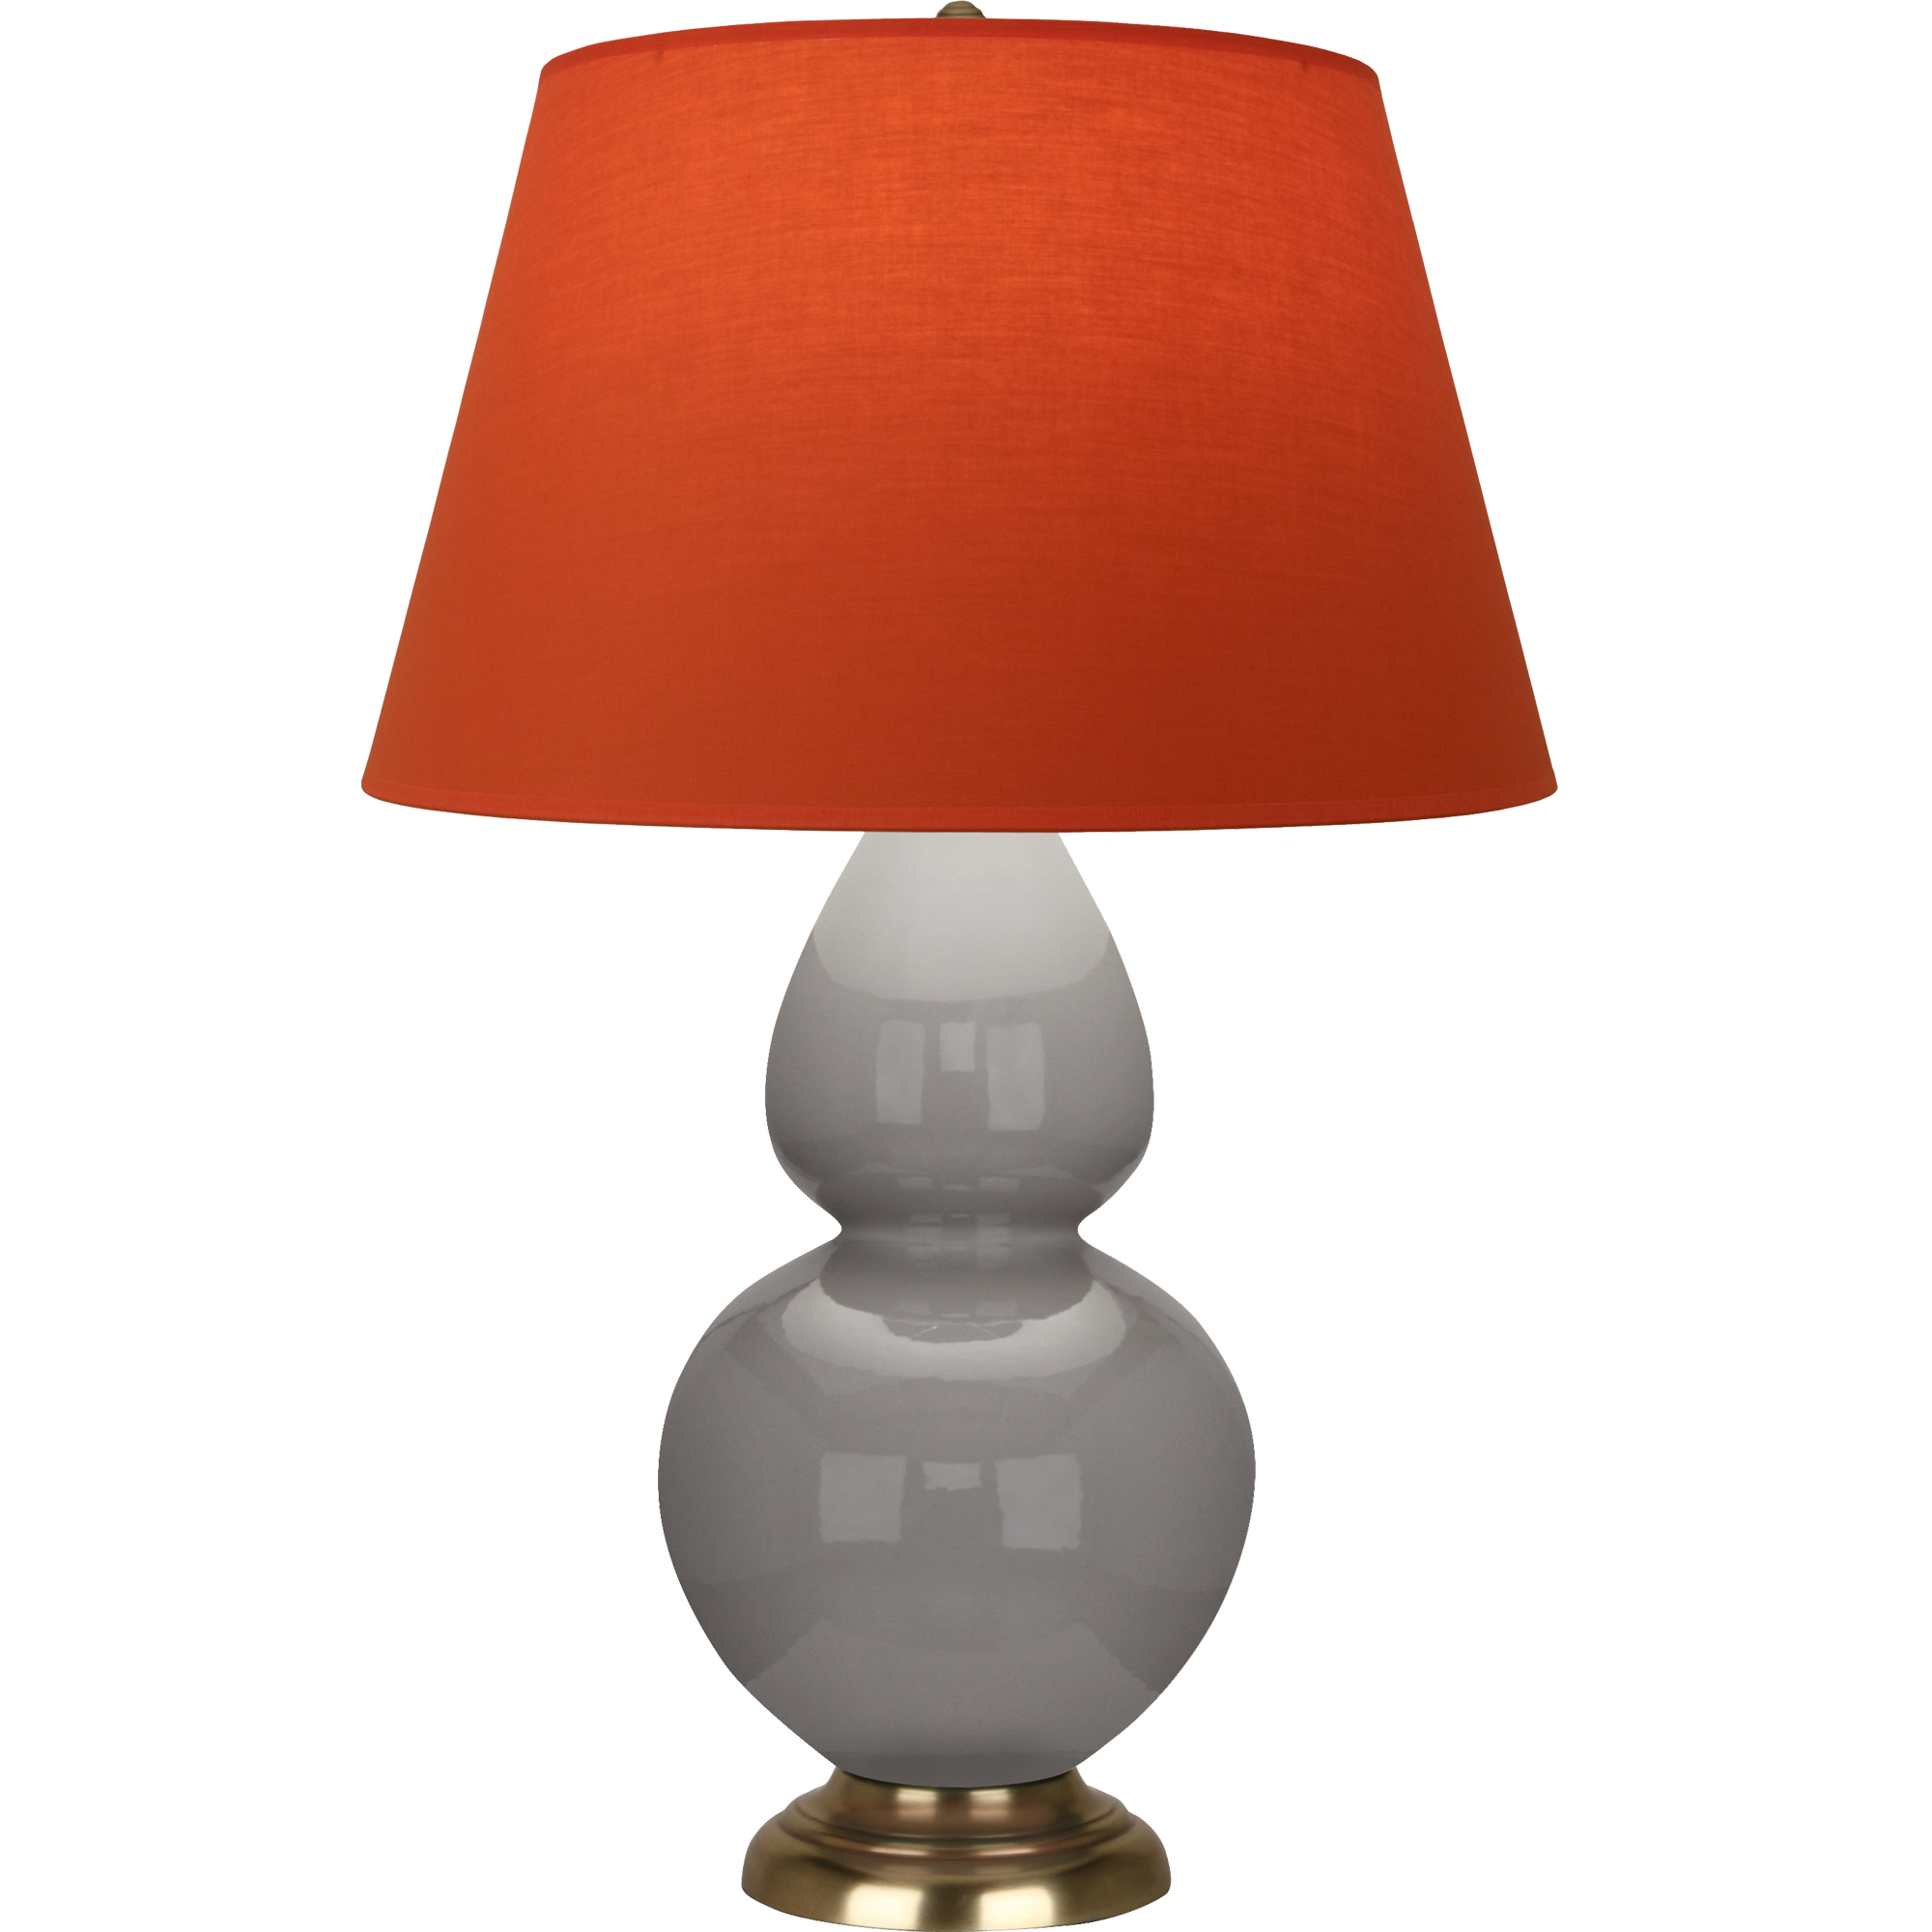 Double Gourd Table Lamp Style #1748T